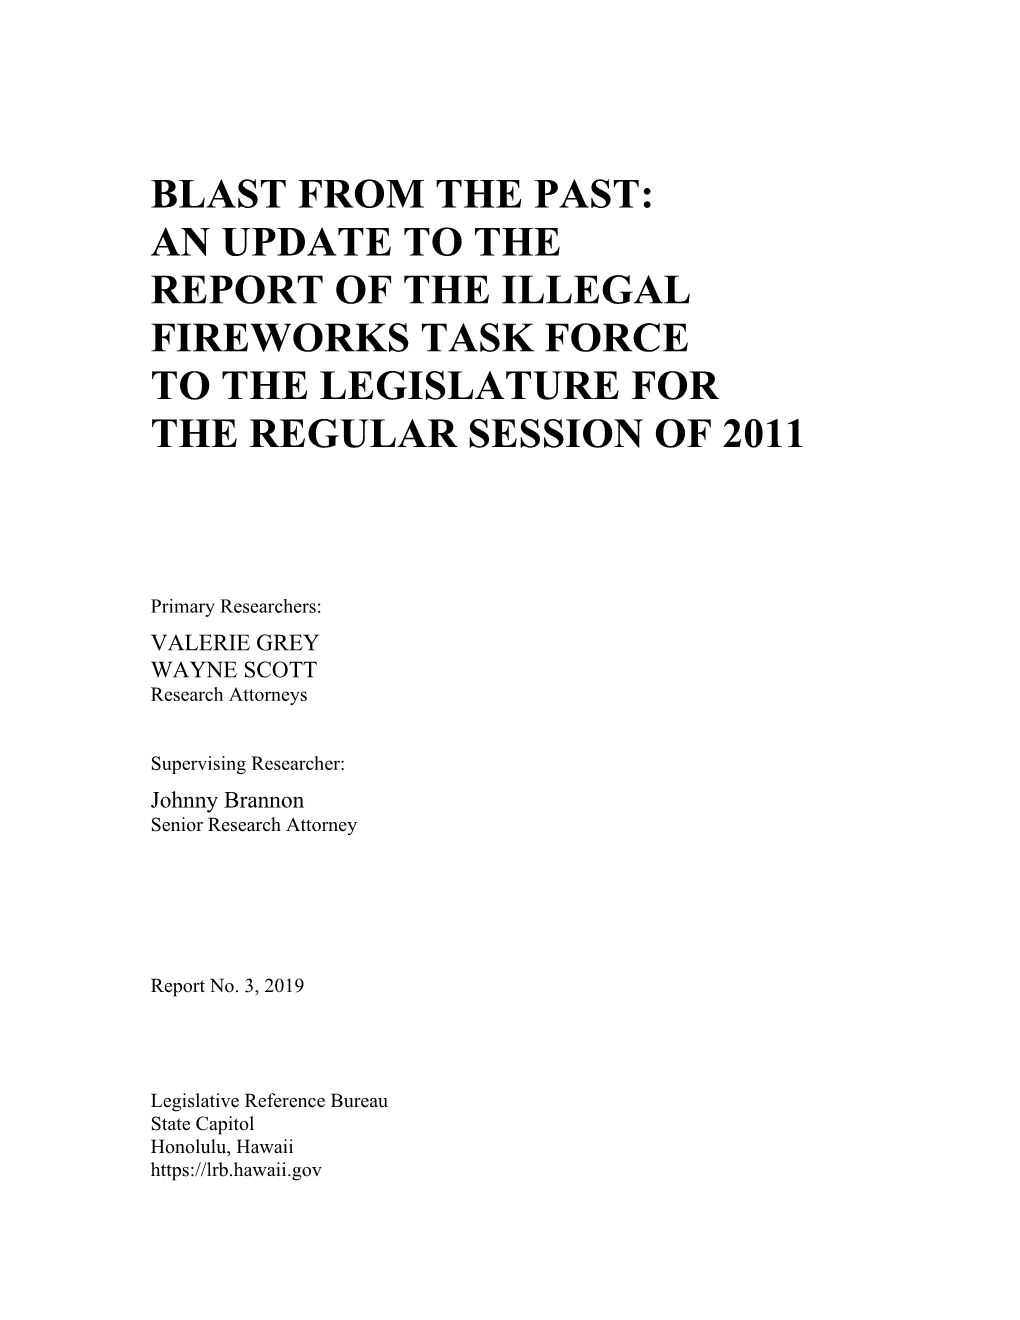 Blast from the Past: an Update to the Report of the Illegal Fireworks Task Force to the Legislature for the Regular Session of 2011